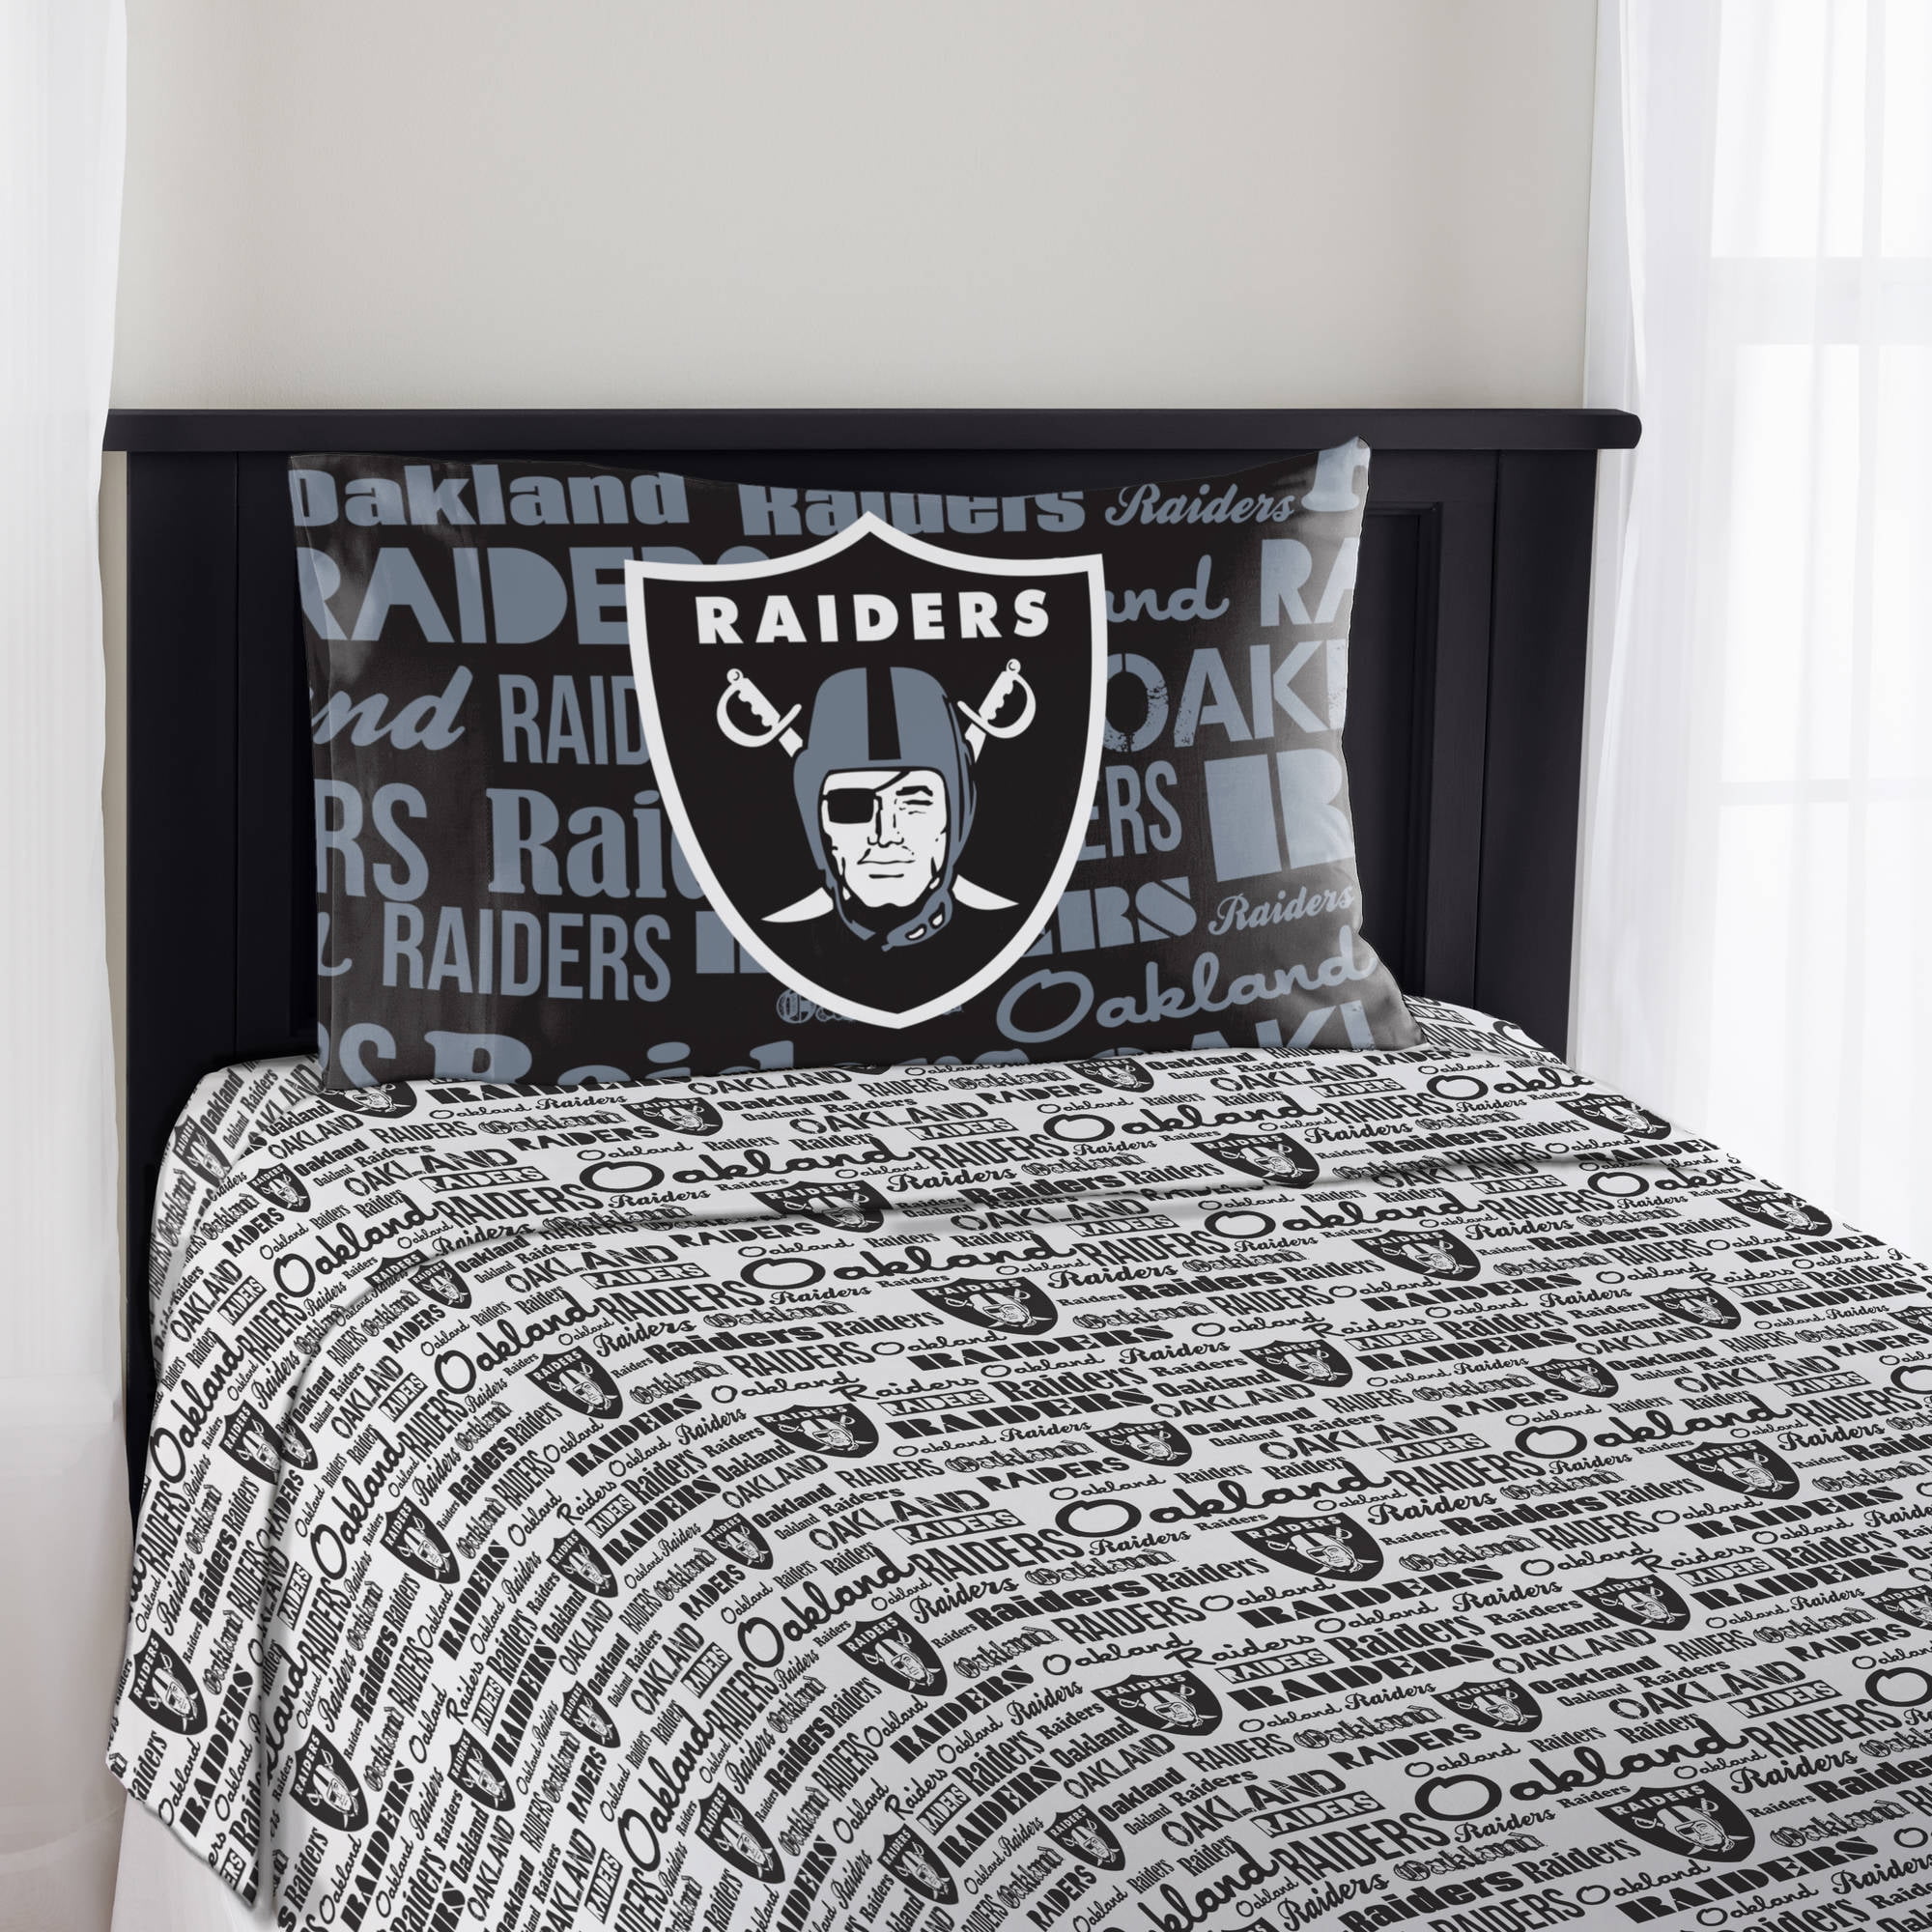 Details about  / Las Vegas Raiders Football Fitted Sheet 3PCS Bed Sheet /& Pillowcase Bedding sets